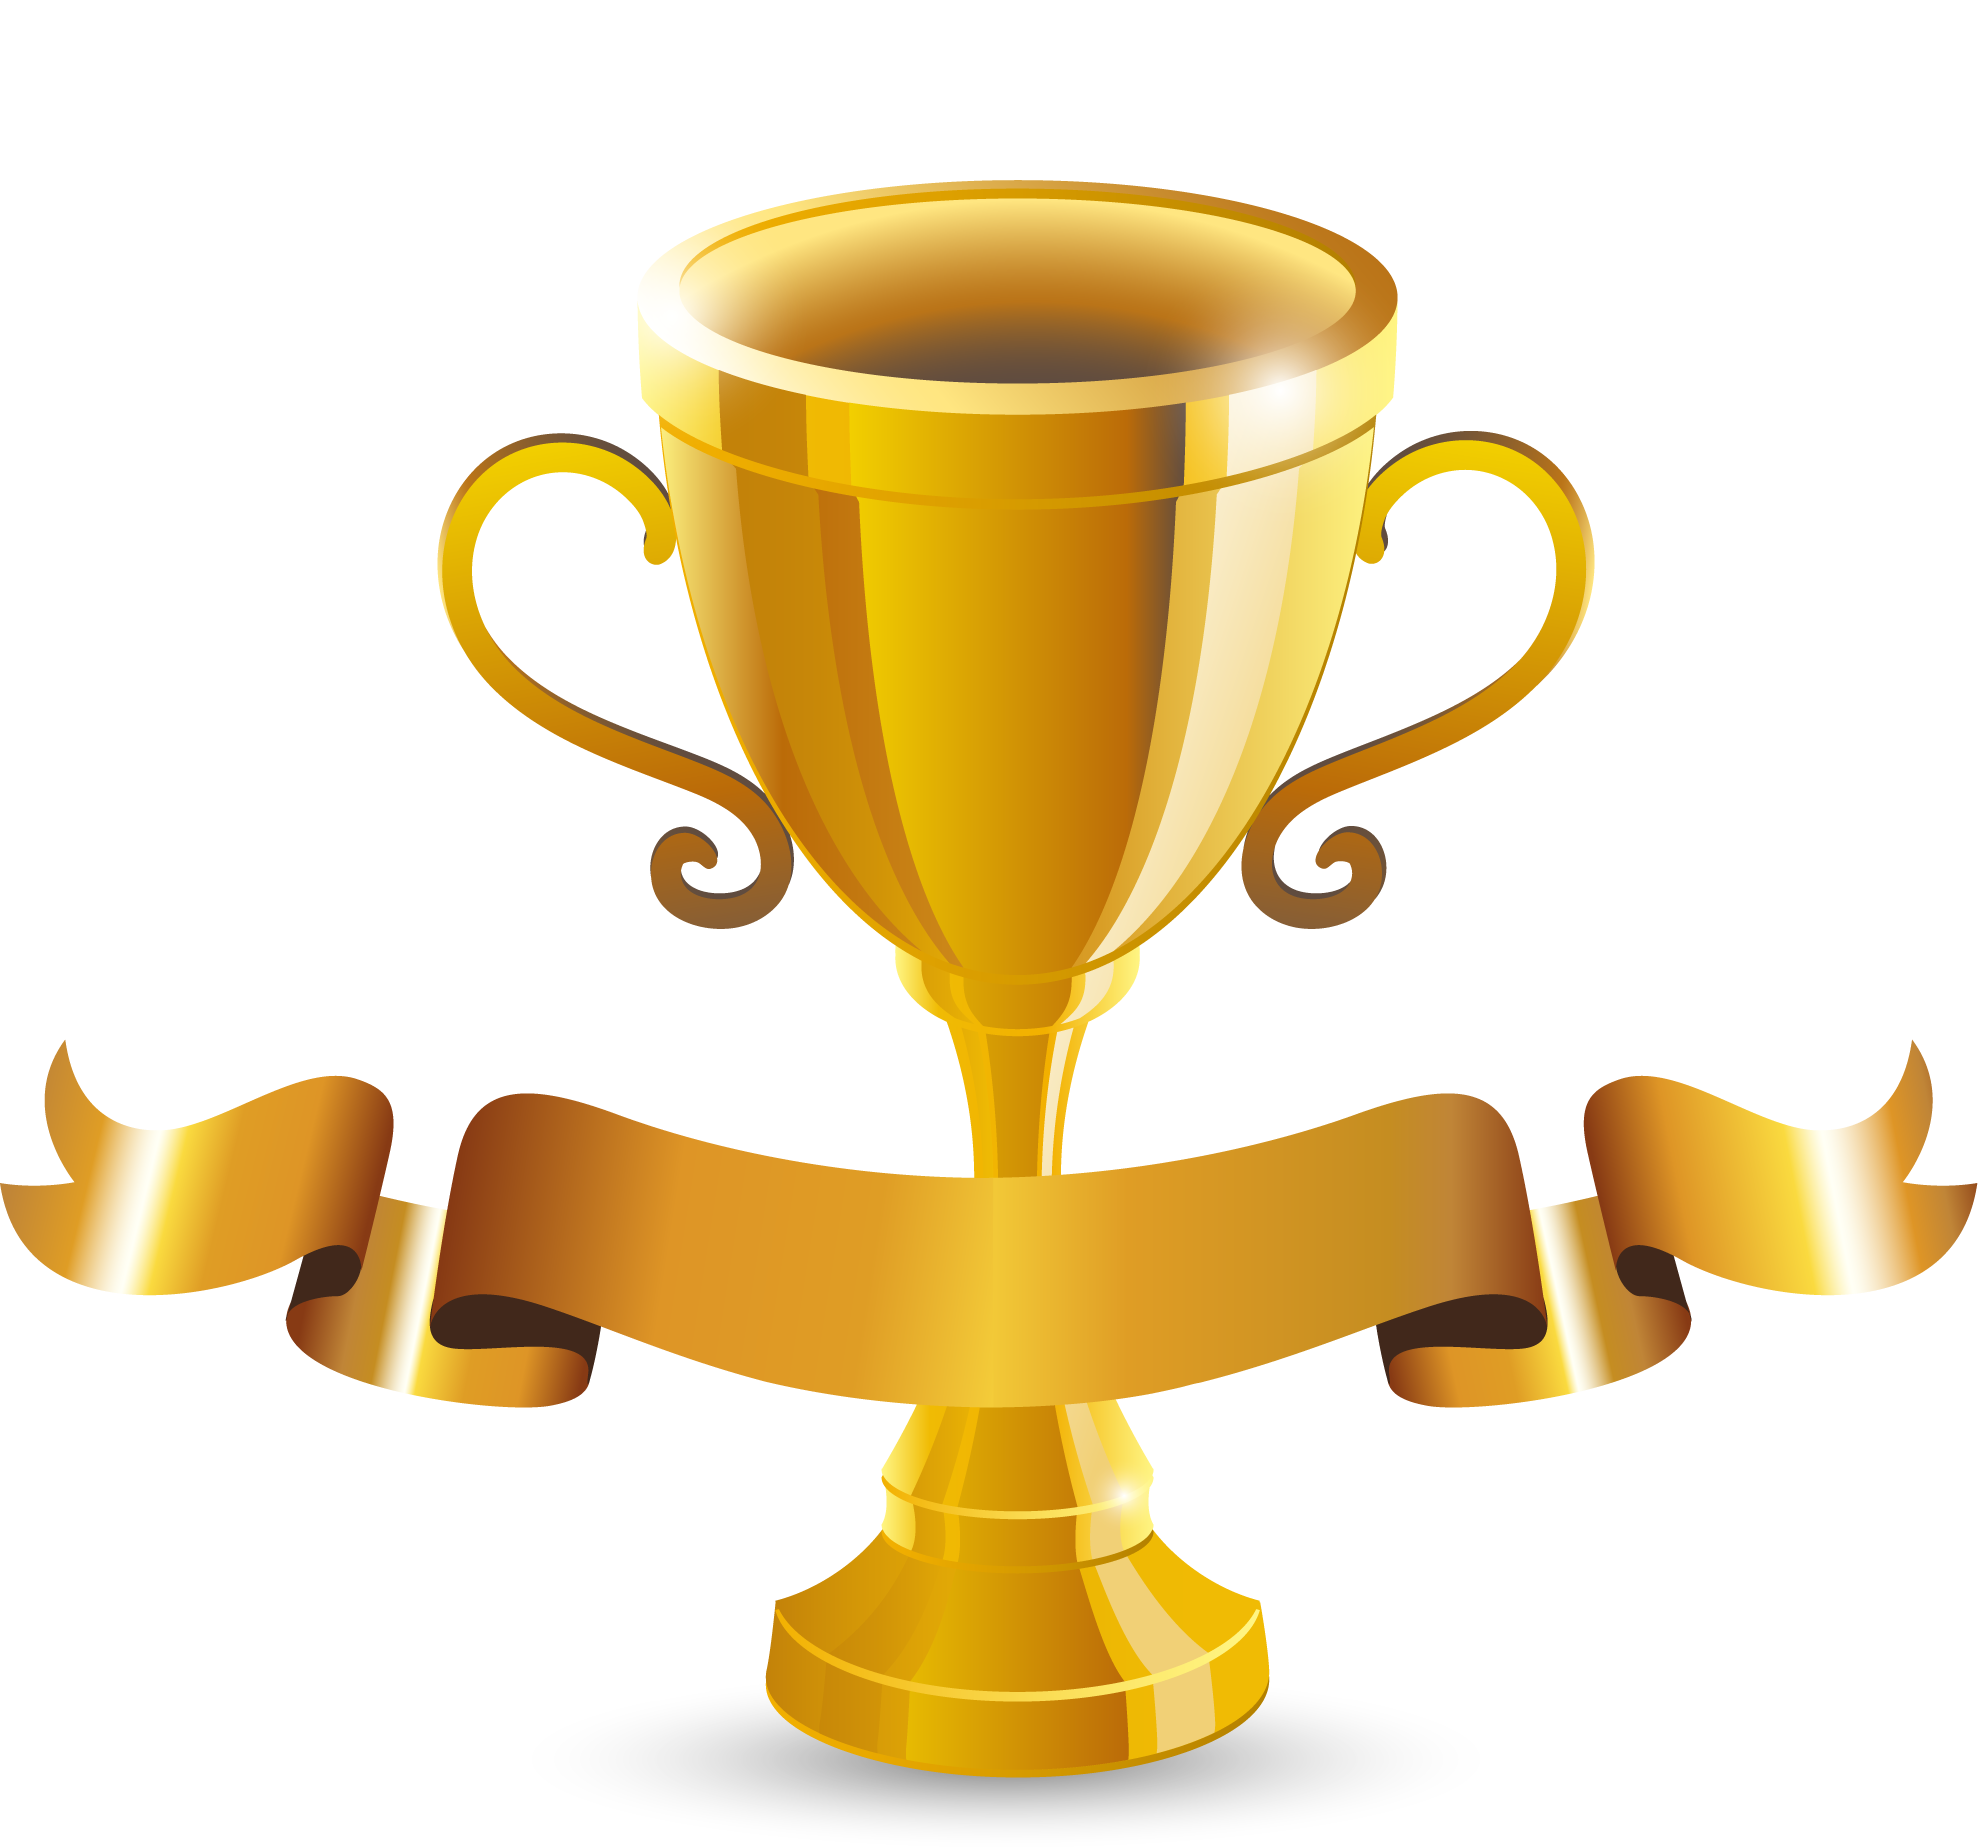 Png transparent free images. Wrestlers clipart trophy